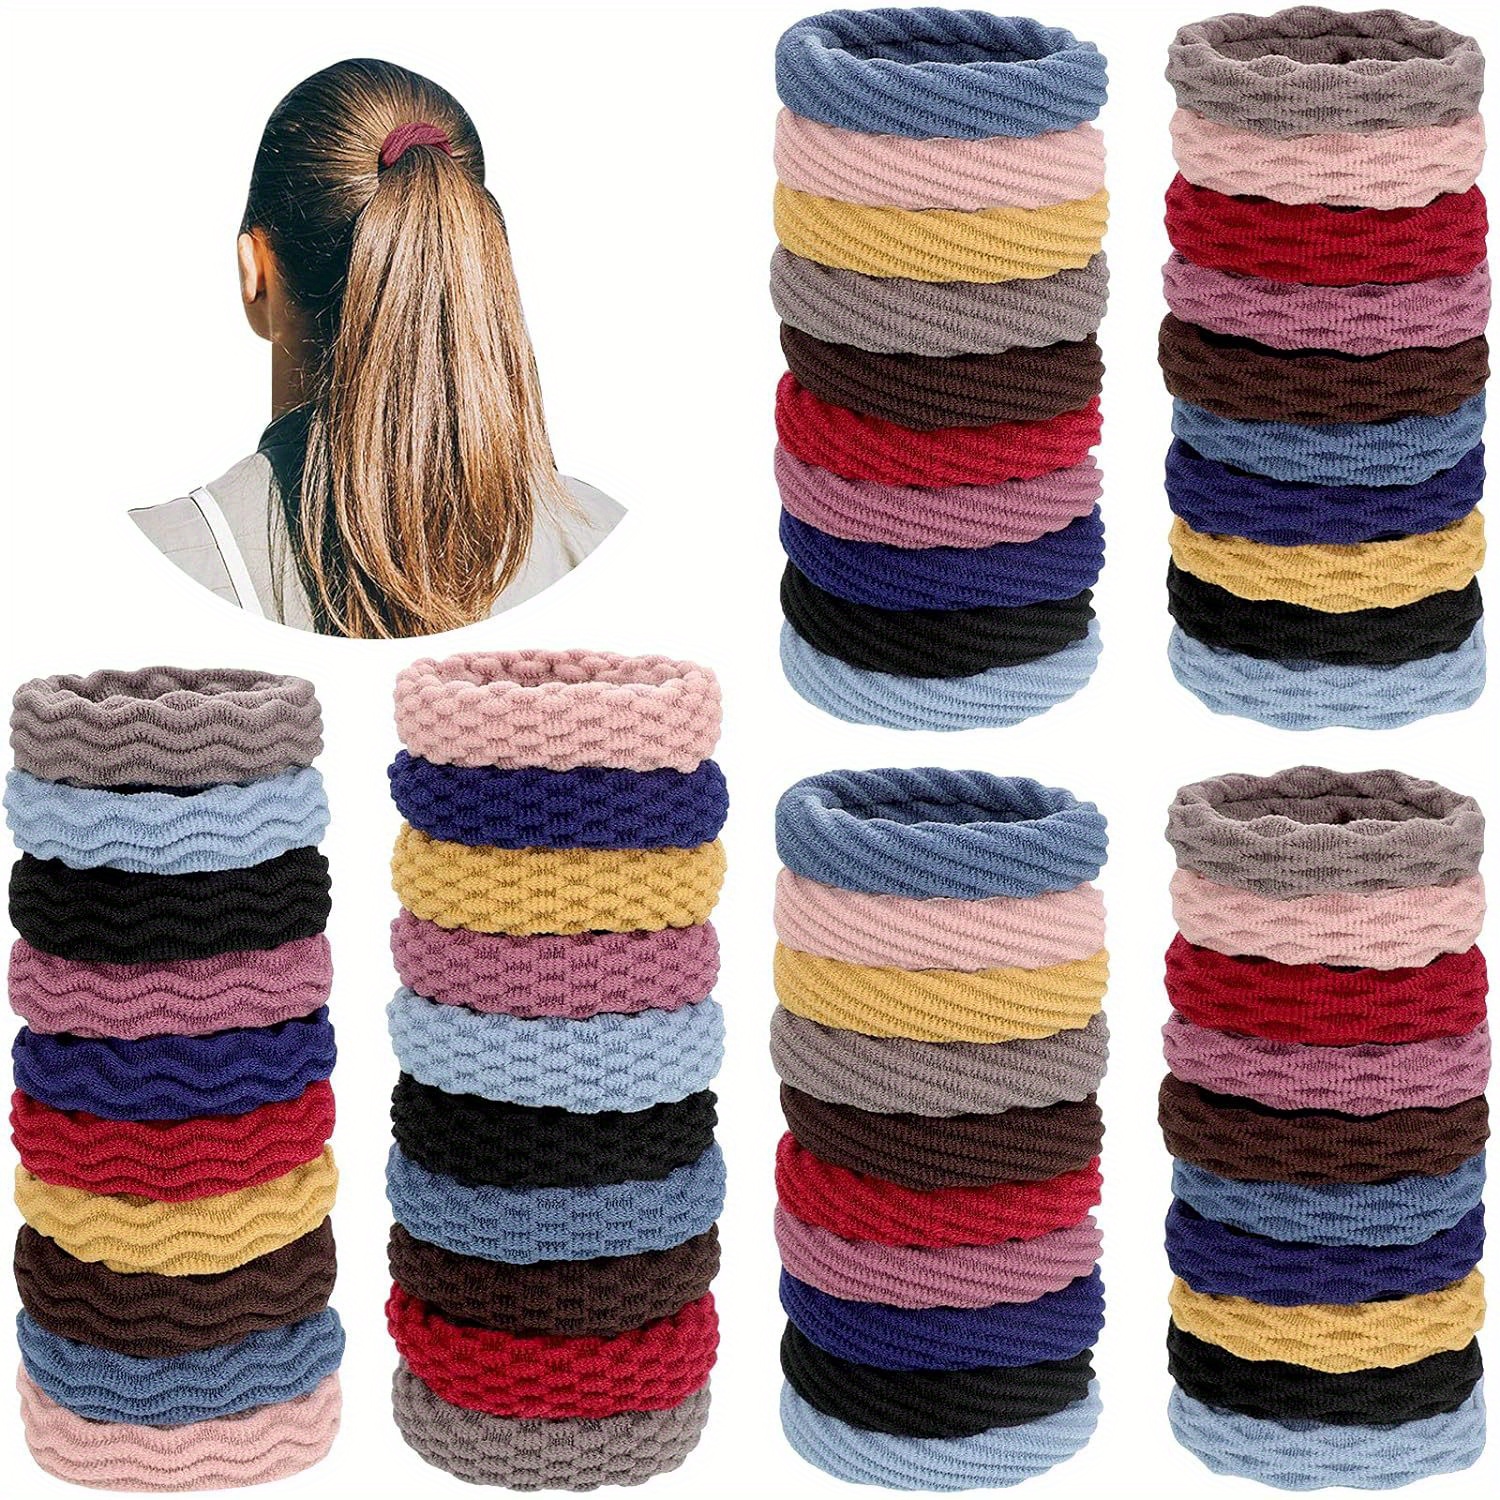 

60 Pcs Seamless Hair Ties Ponytail Holders Thick Elastic Hair Tie Cotton No Crease Hair Band For Thick Heavy And Curly Hair, Lightweight Highly Elastic